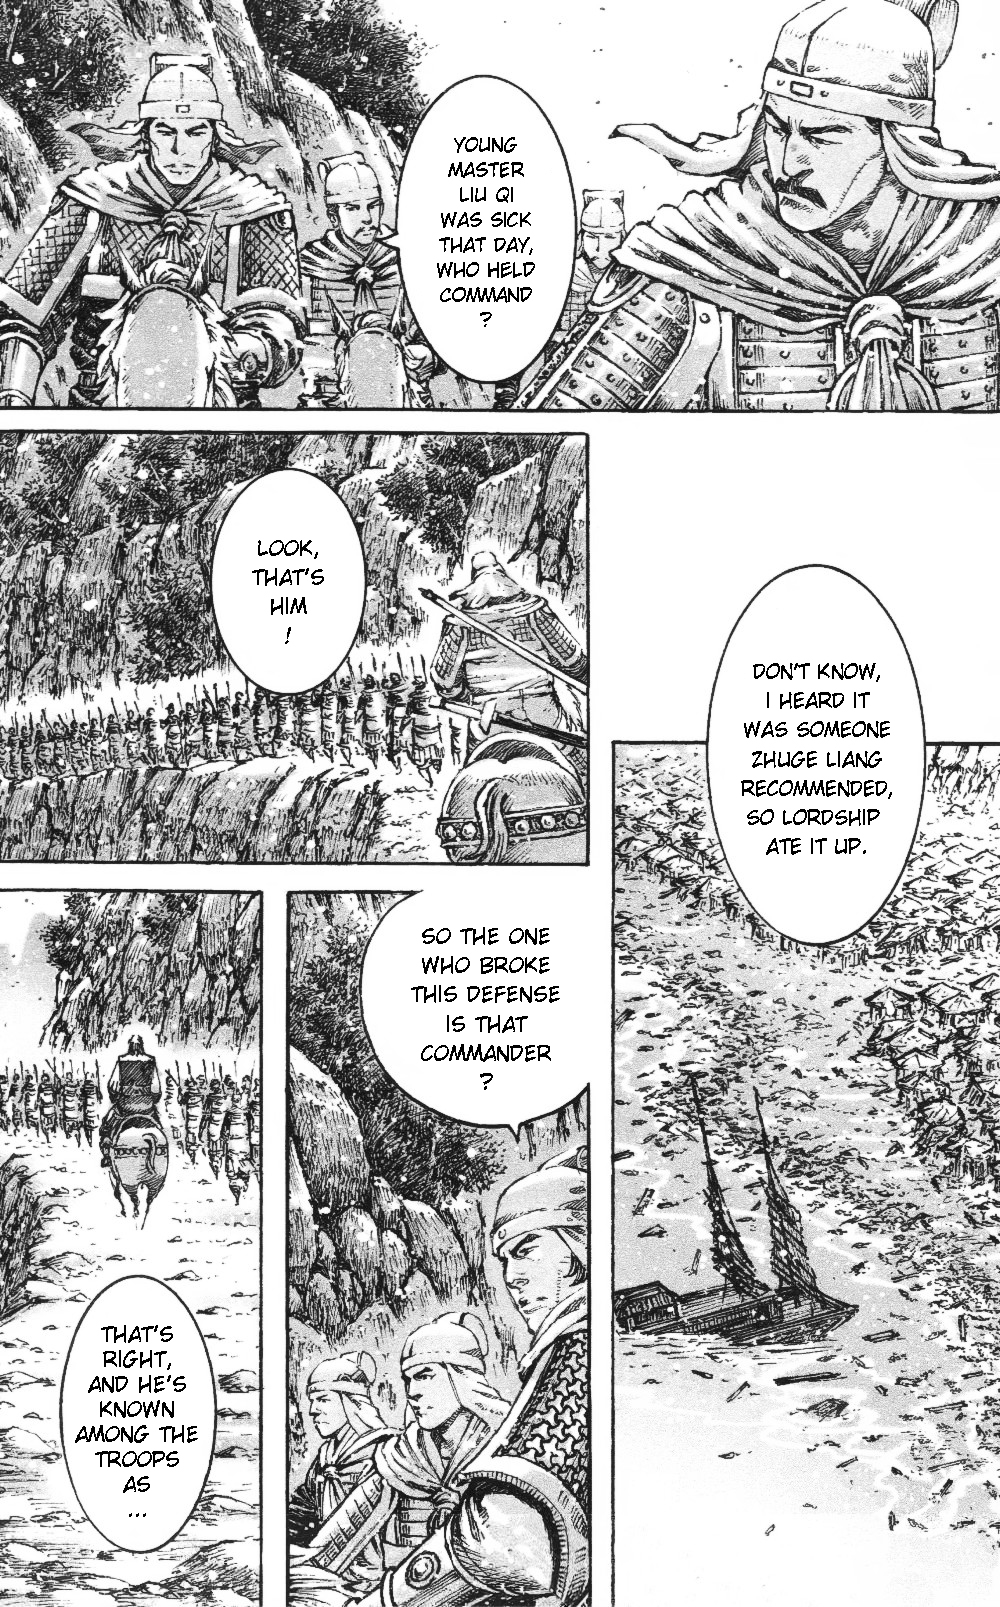 The Ravages of Time Ch.461